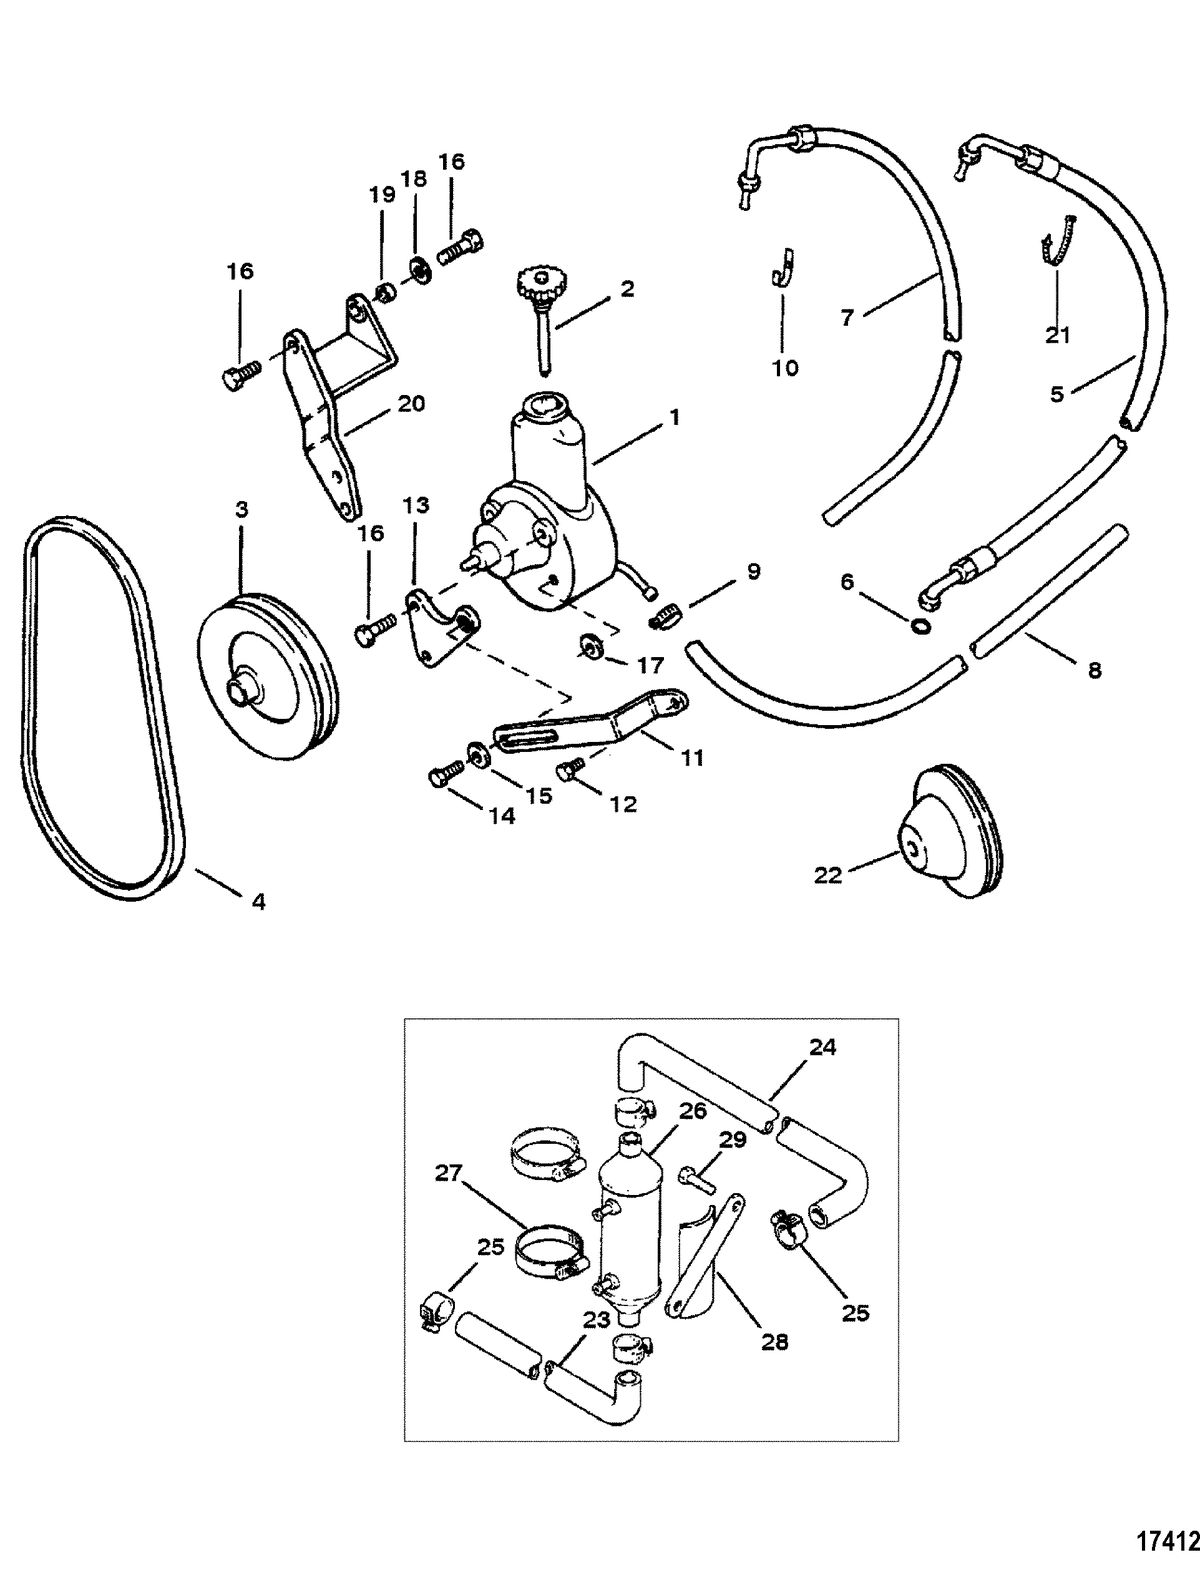 ACCESSORIES STEERING SYSTEMS AND COMPONENTS Power Steering Kit(71333A5)